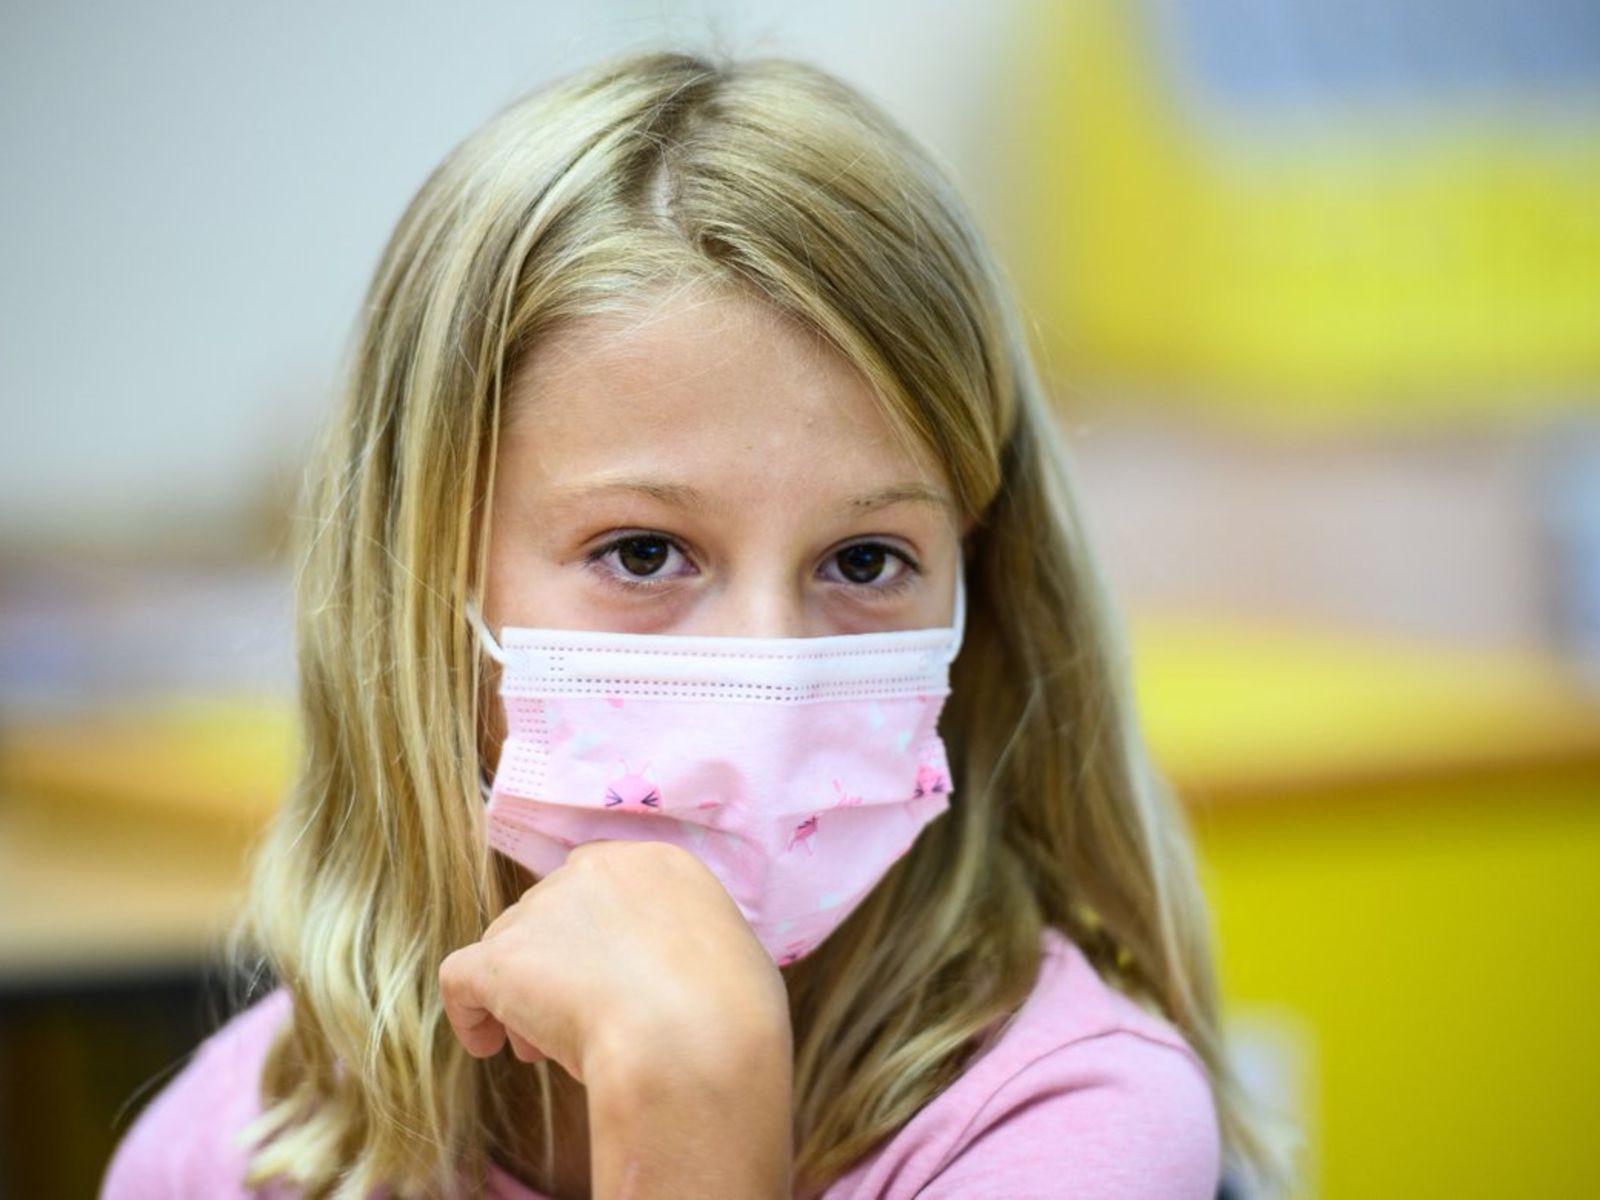 ‘It’s going to be really hard to keep schools open' amid coronavirus pandemic, doctor warns